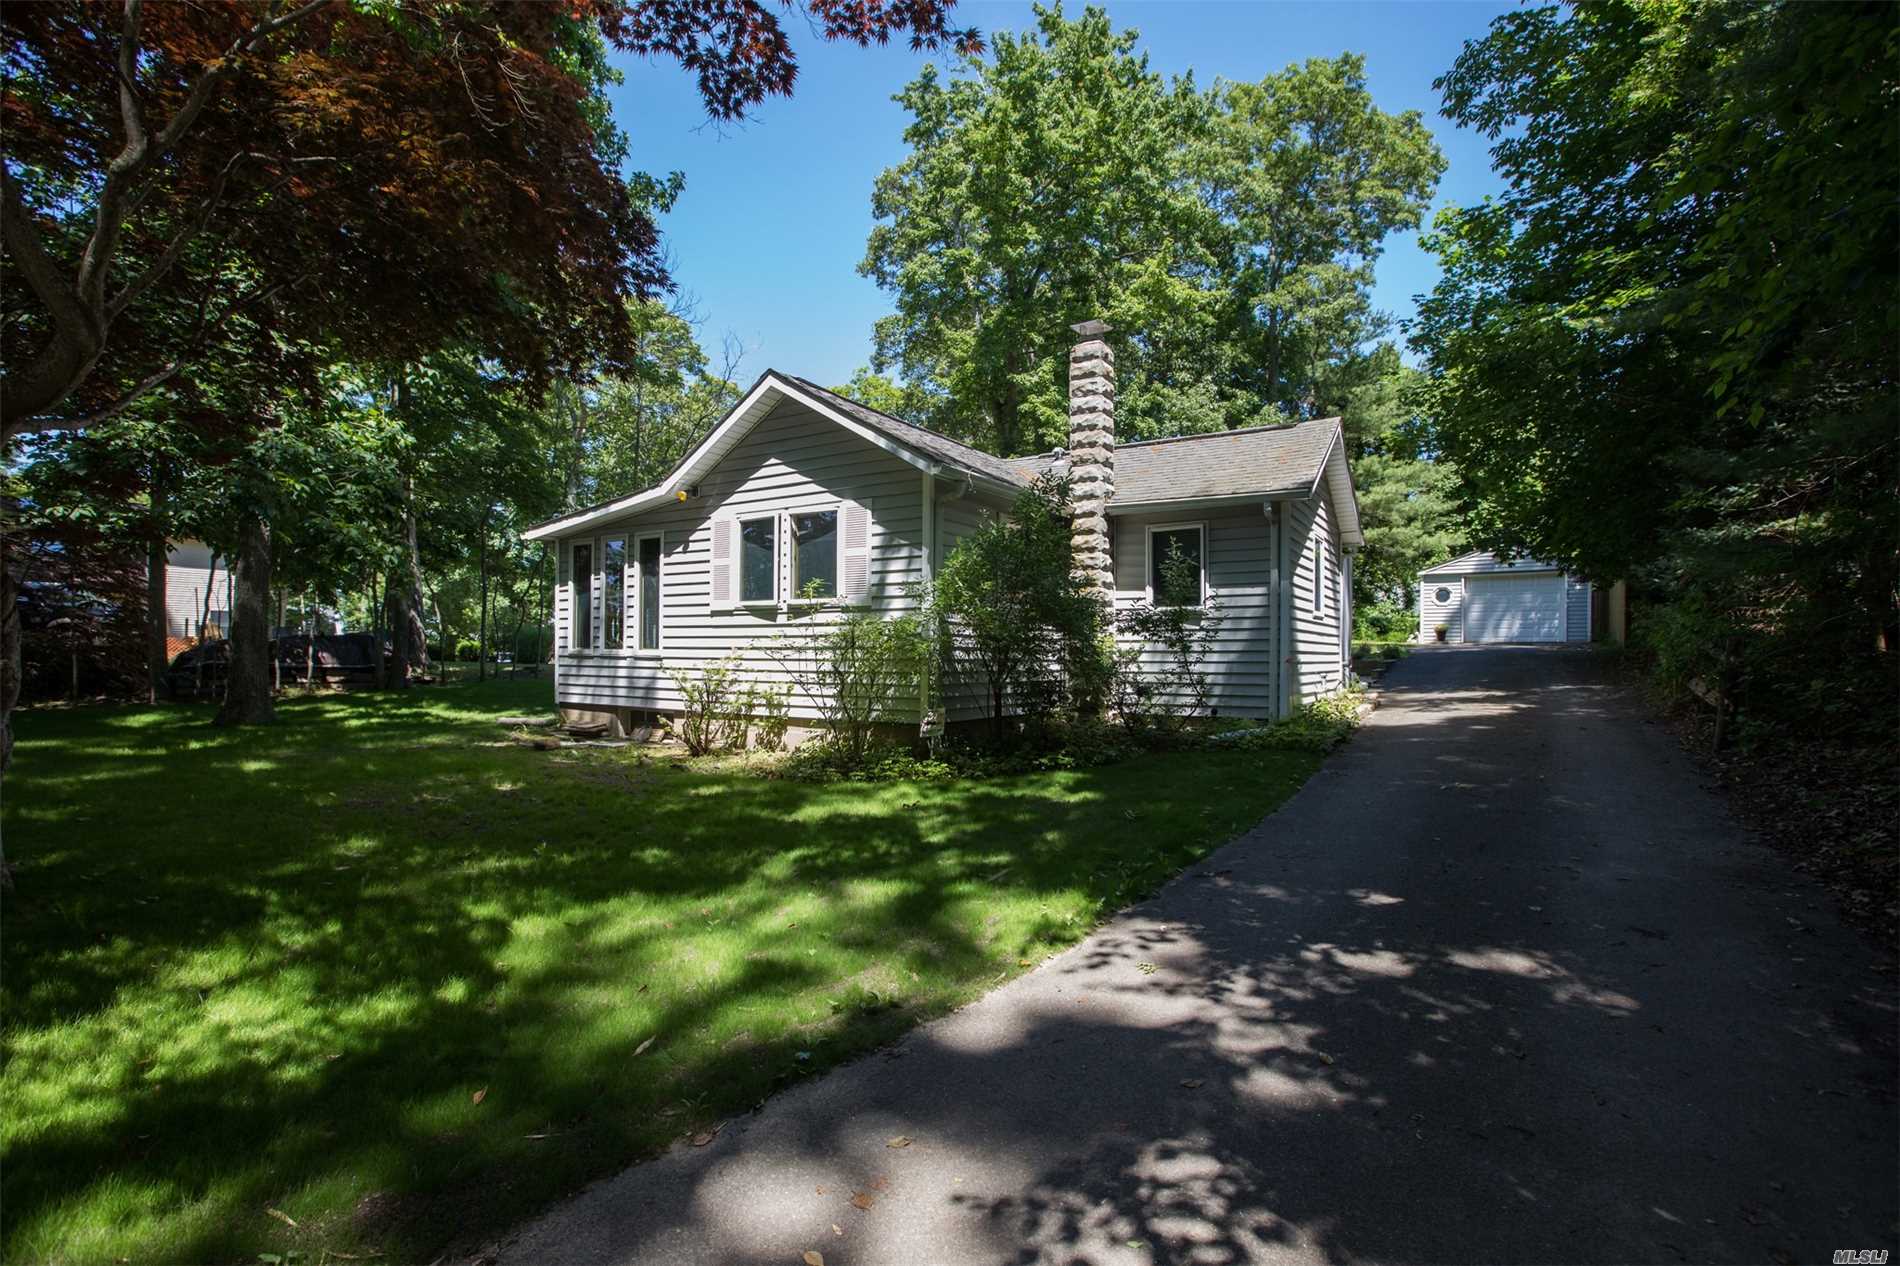 Perfect For Your Summer Retreat. Beautiful 2 Bedroom, 1 Bathroom Beach Cottage, Open Living Space With A Separate Den Area, Deck And Outdoor Shower. Steps To Bay Beach With Water Views From Your Window And Yard!